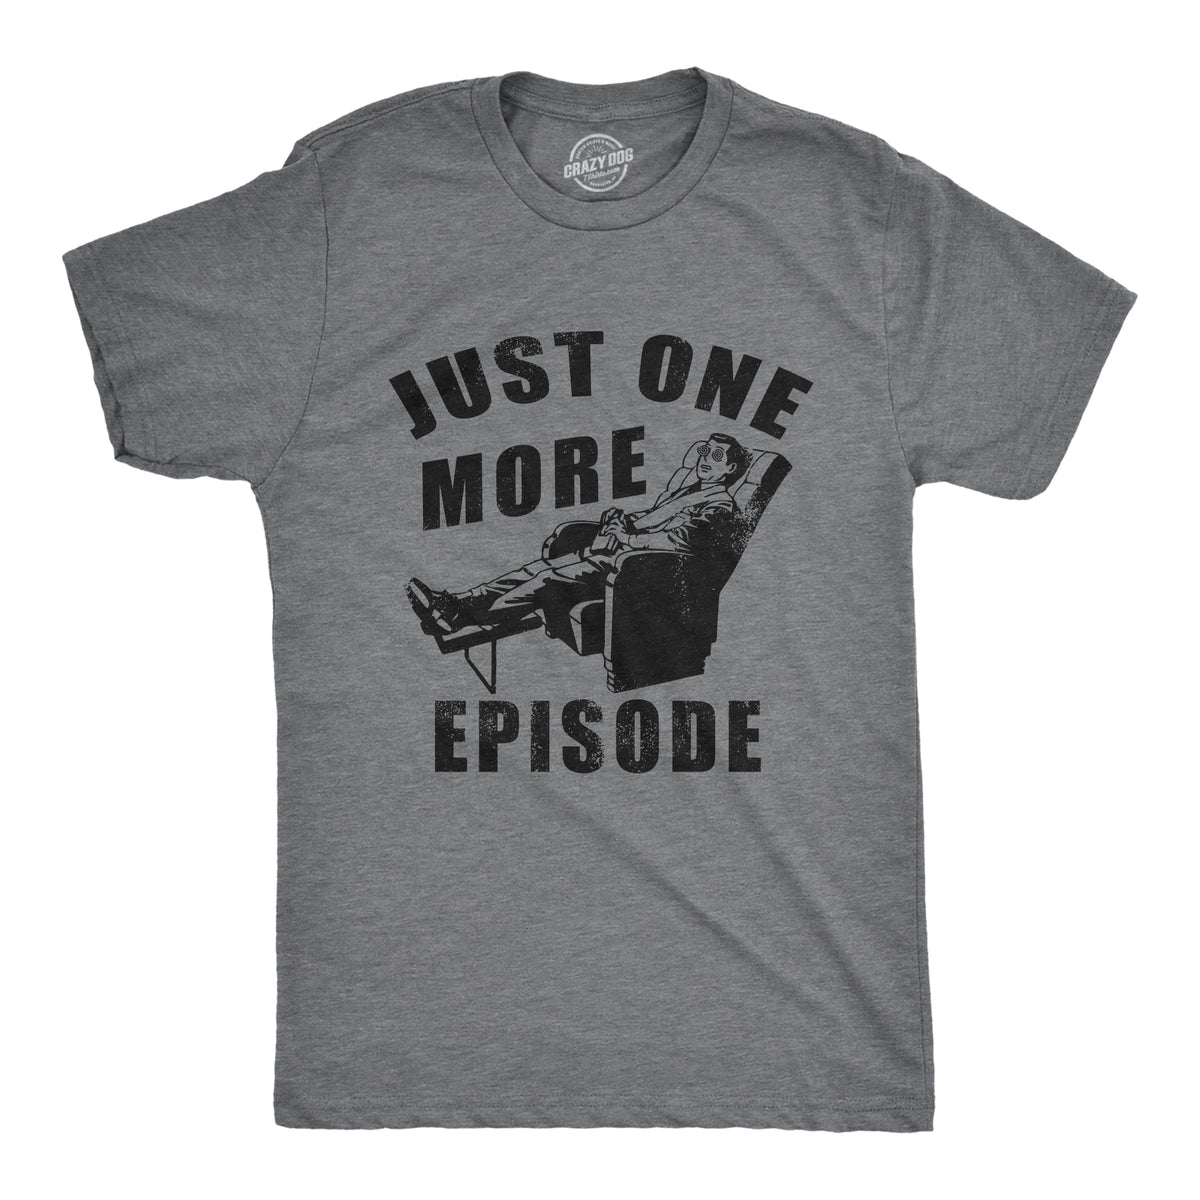 Funny Dark Heather Grey - EPISODE Just One More Episode Mens T Shirt Nerdy TV &amp; Movies sarcastic Tee